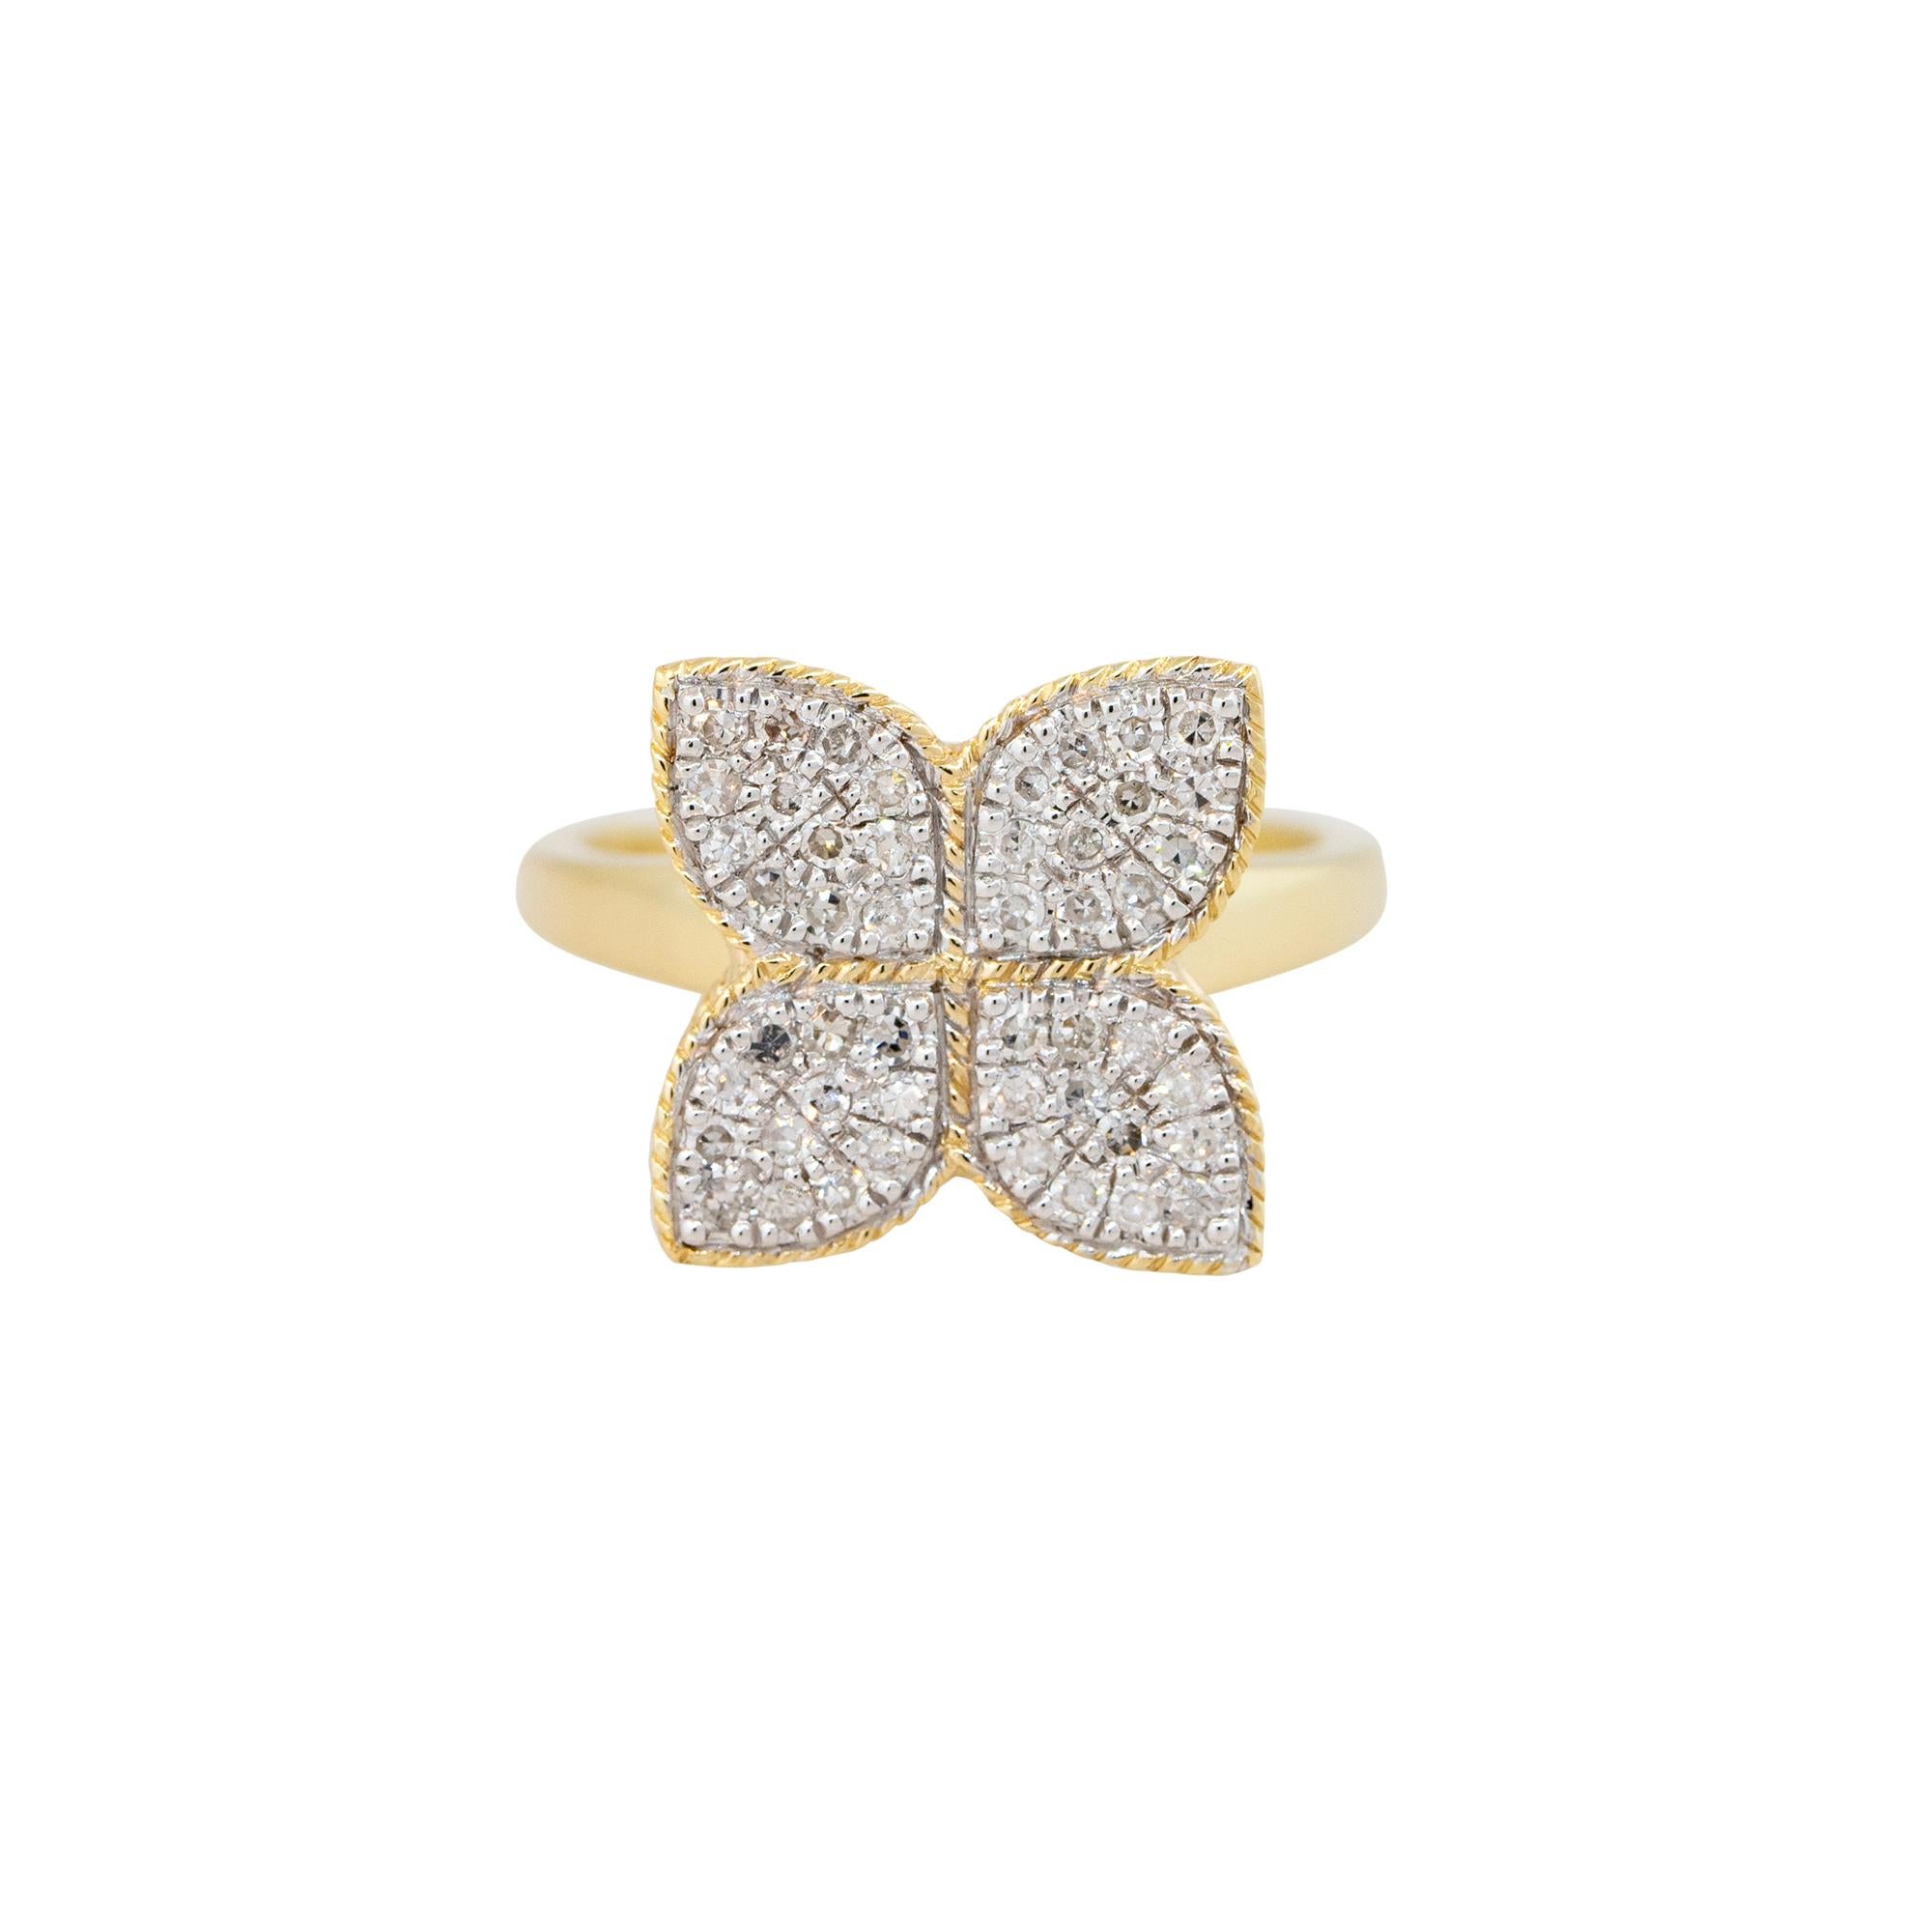 14k Yellow Gold 0.40ctw Pave Diamond Clover Ring
Material: 14k Yellow Gold
Diamond Details: There are approximately 0.40ctw of Pave set, Round Brilliant Diamonds. All diamonds are approximately G/H in color and approximately SI in clarity
Ring